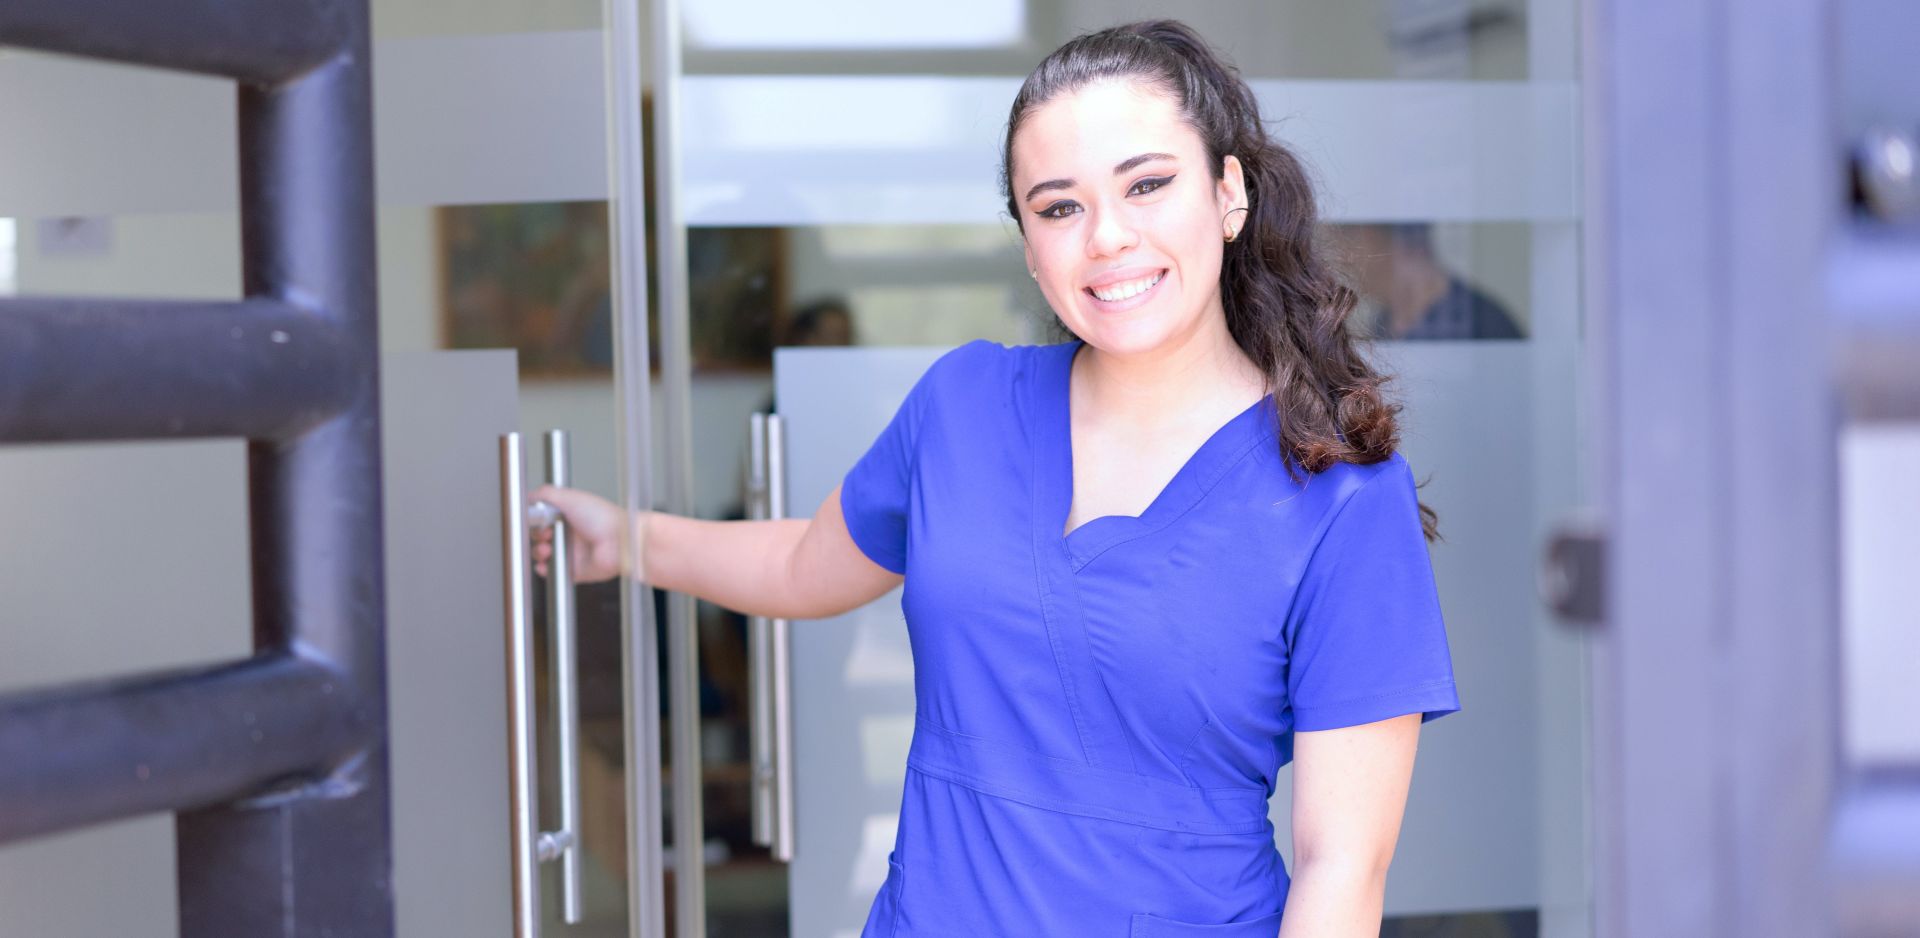 Woman in Blue Scrub Suit Smiling